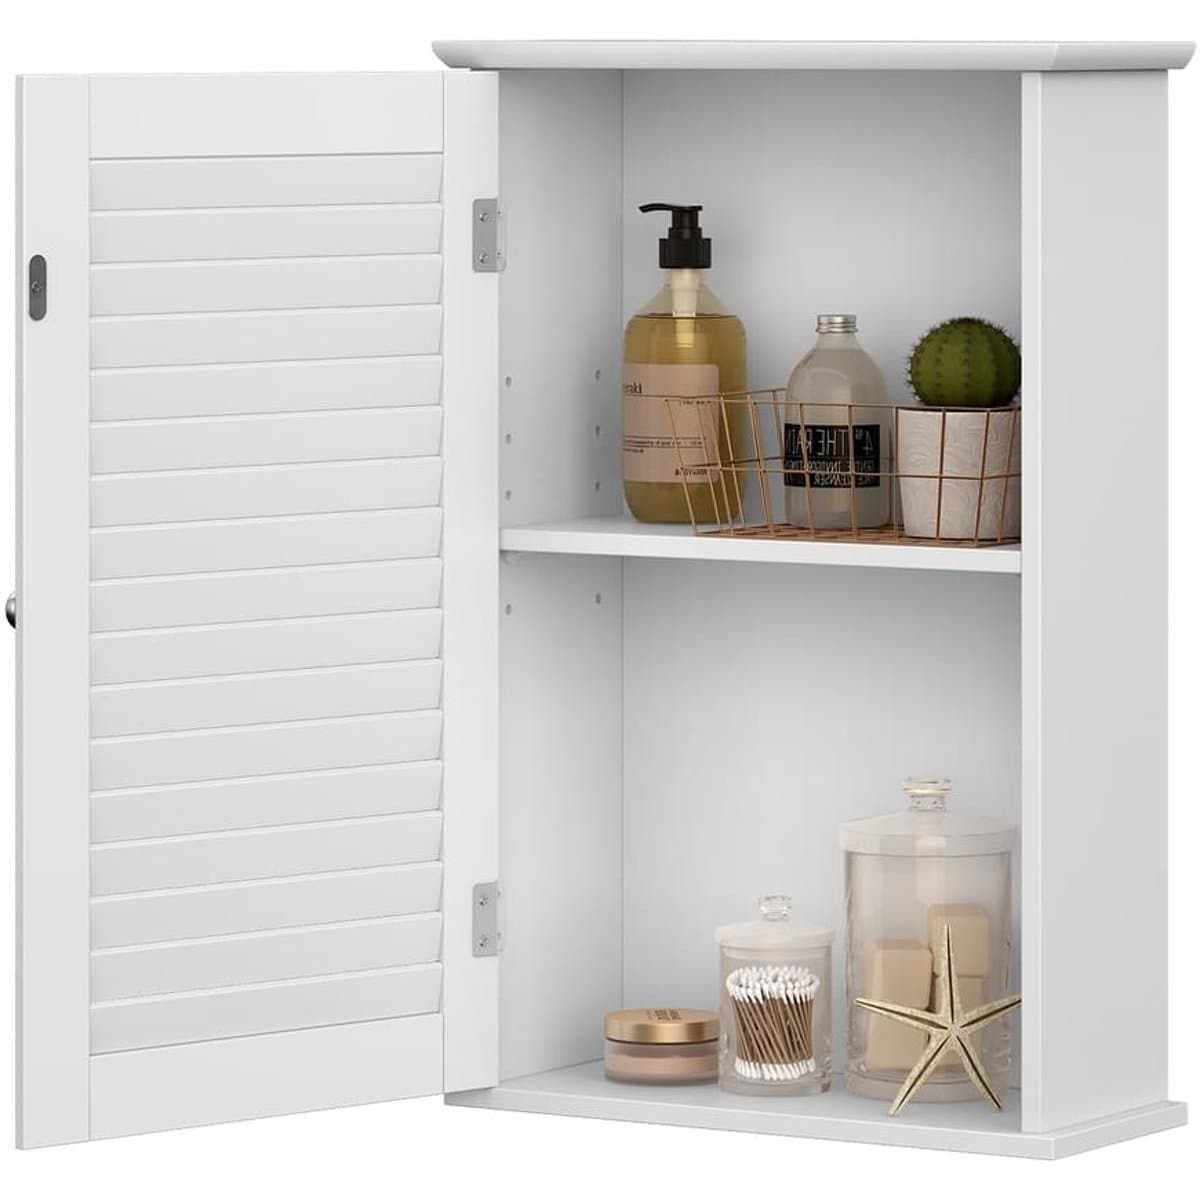 Nancy's Bathroom Cabinet - Wall Cabinet - Cabinet for the Wall